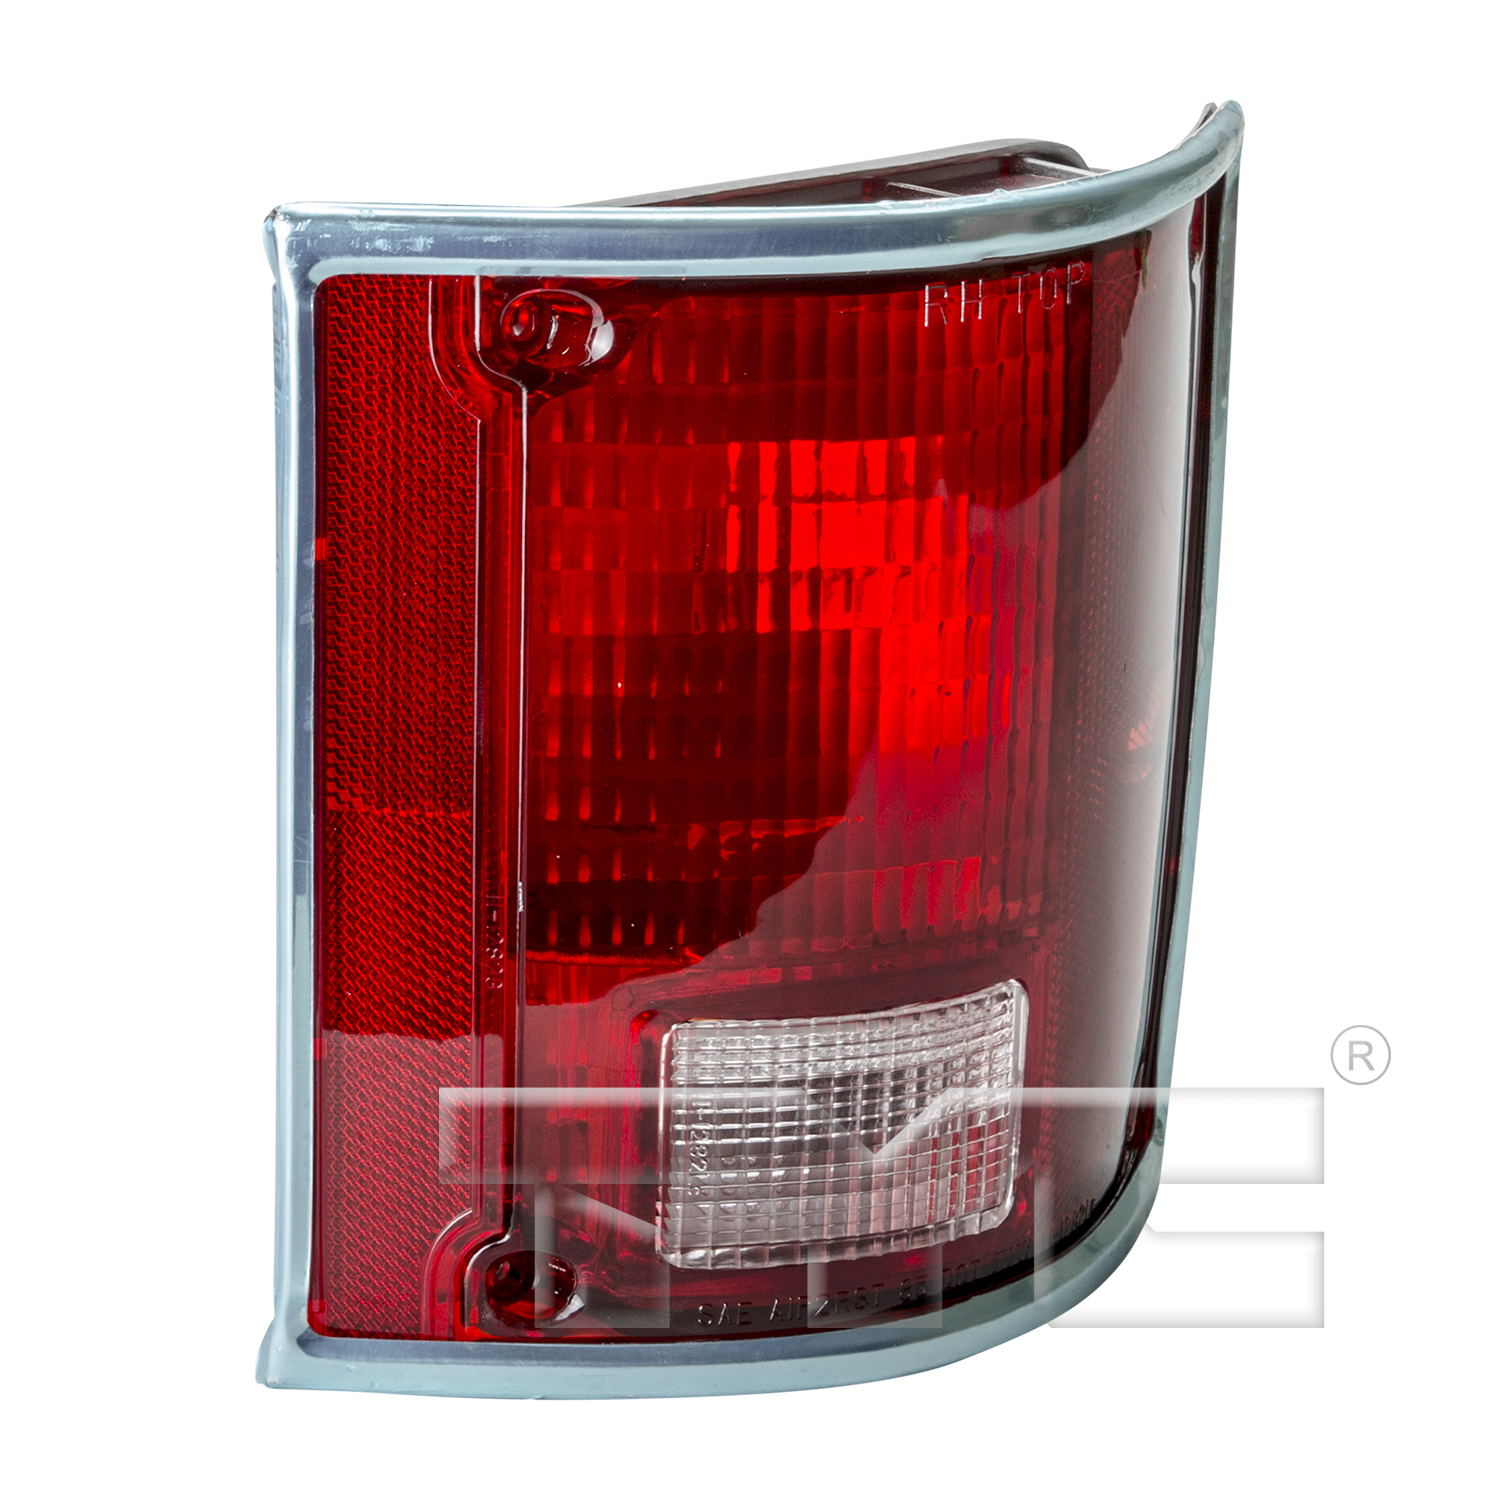 Aftermarket TAILLIGHTS for GMC - C1500, C1500,79-91,RT Taillamp assy